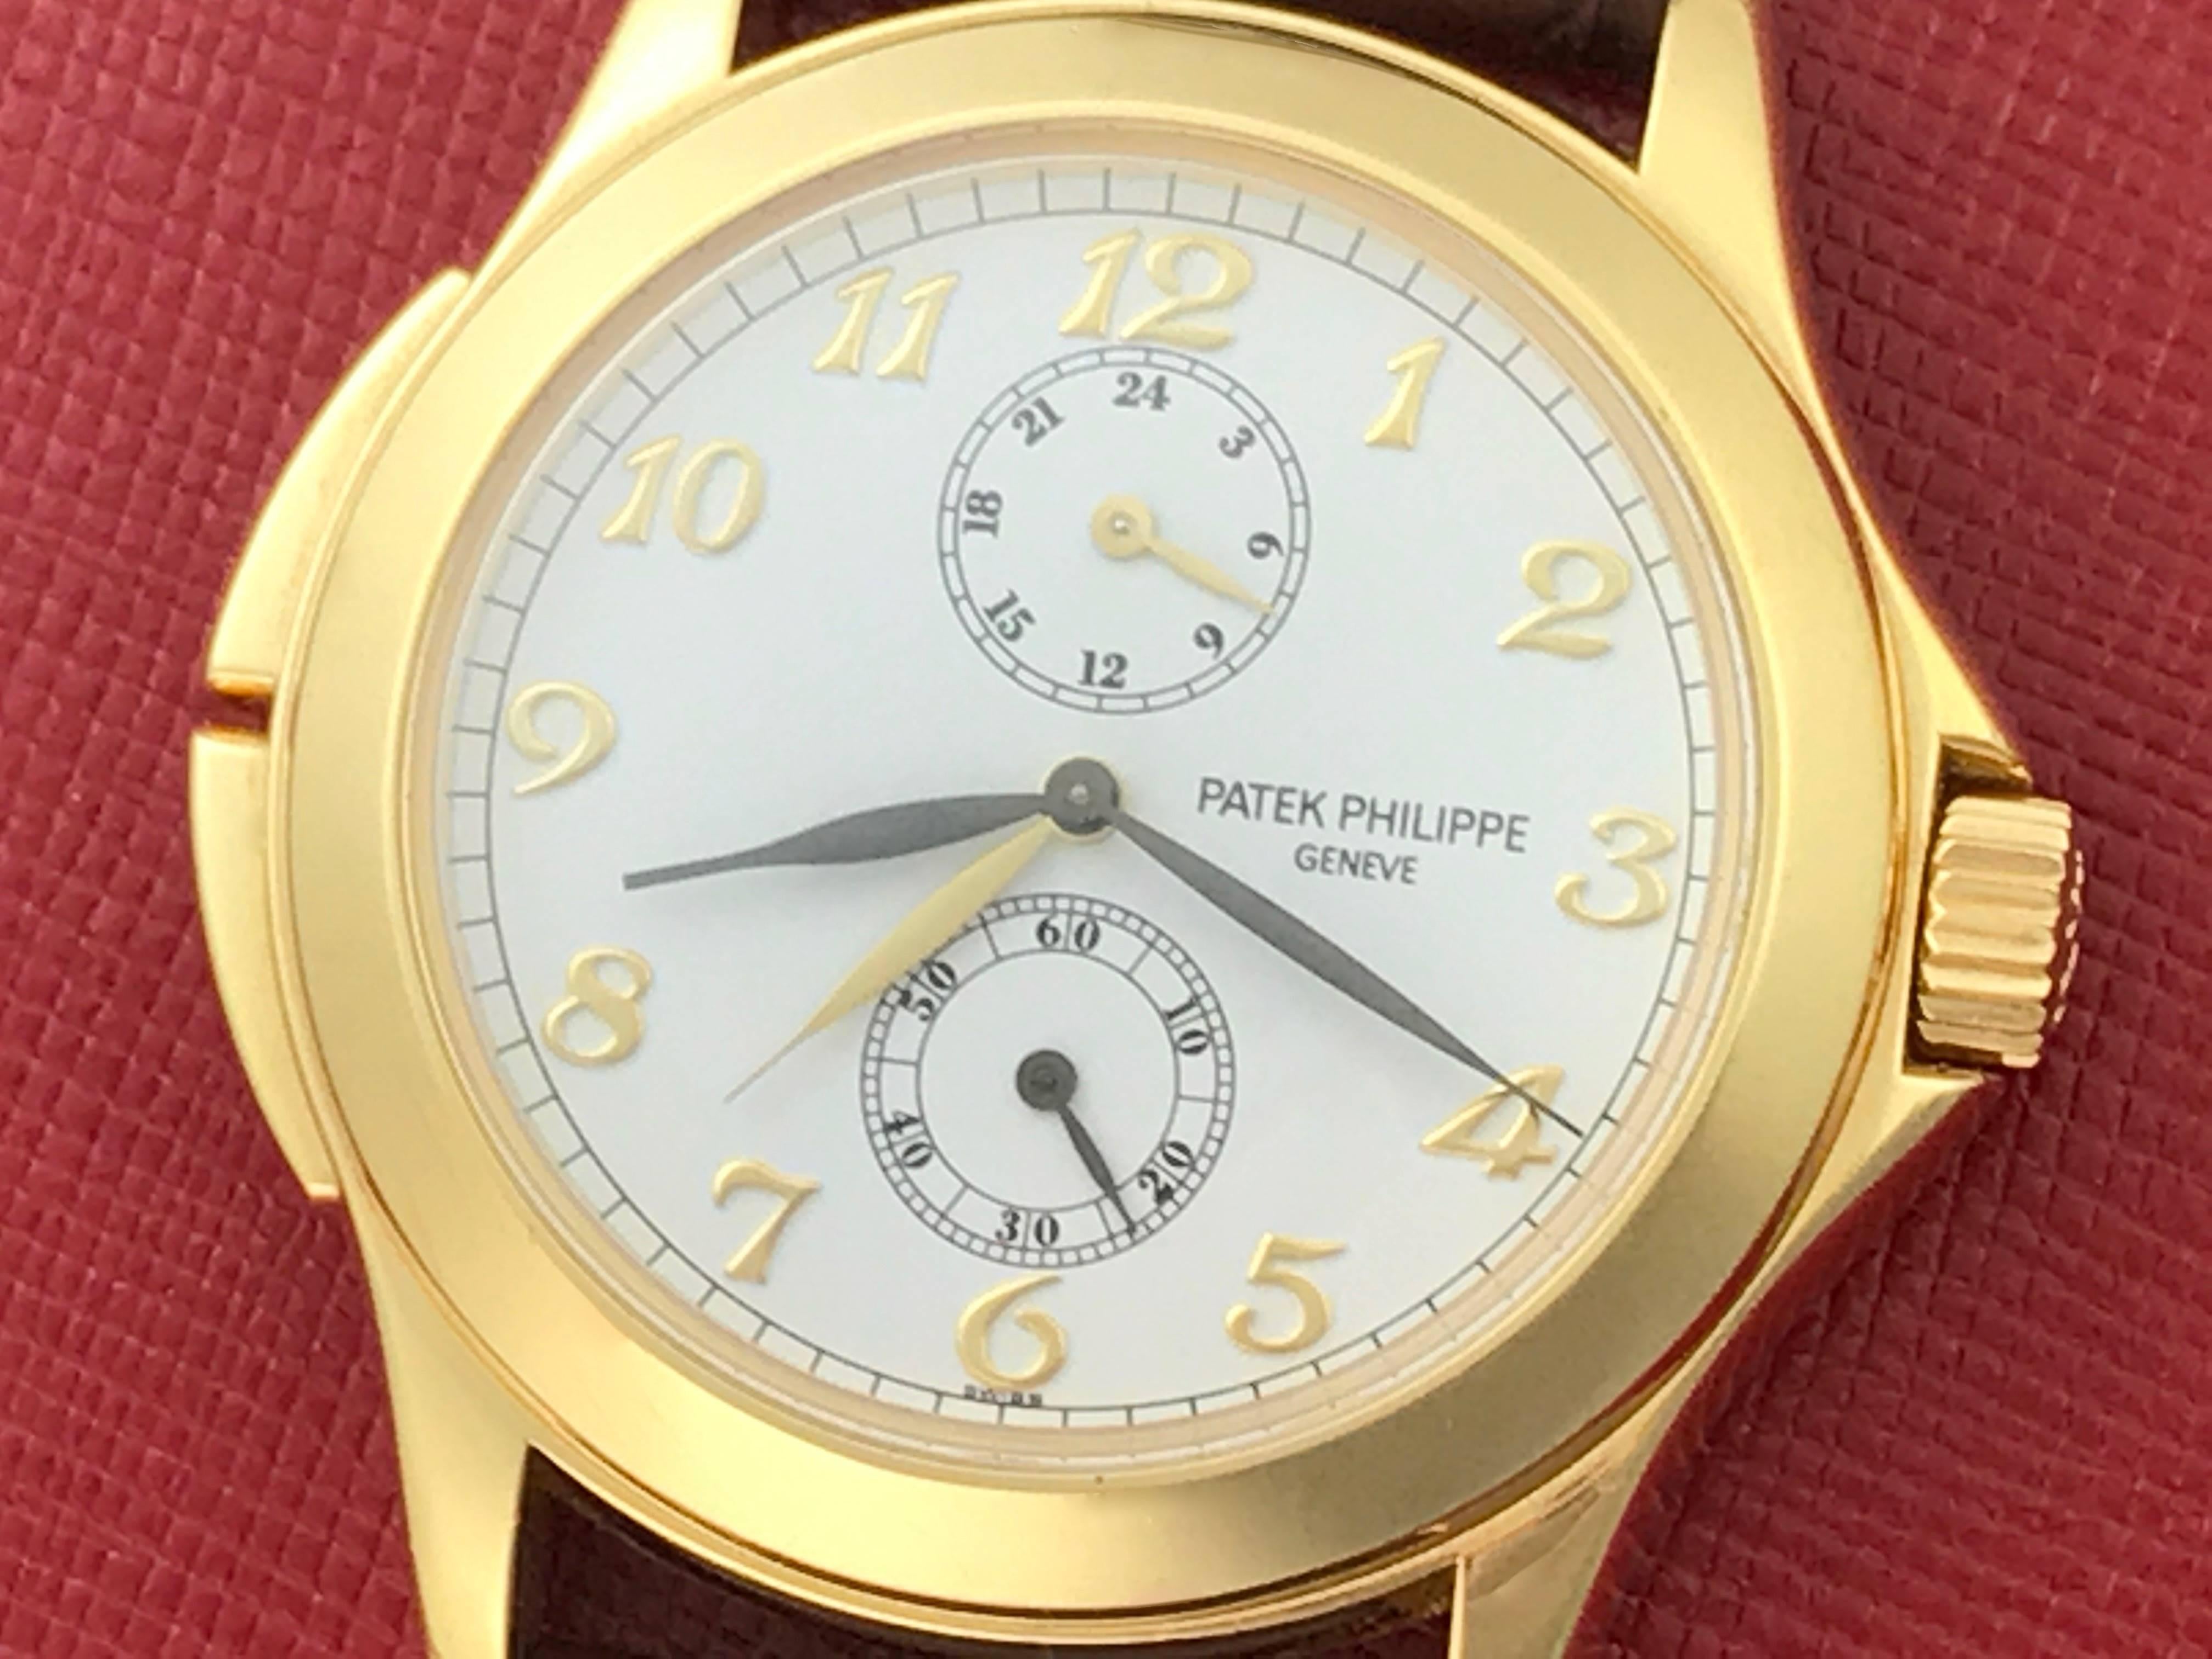 Patek Philippe 18k Yellow Gold Travel Time Men's manual wind Wrist Watch. 18k Yellow Gold round style case with exposition back to view movement (36mm). White Dial with black arabic numerals. Brown alligator strap with 18k yellow gold Patek Philippe